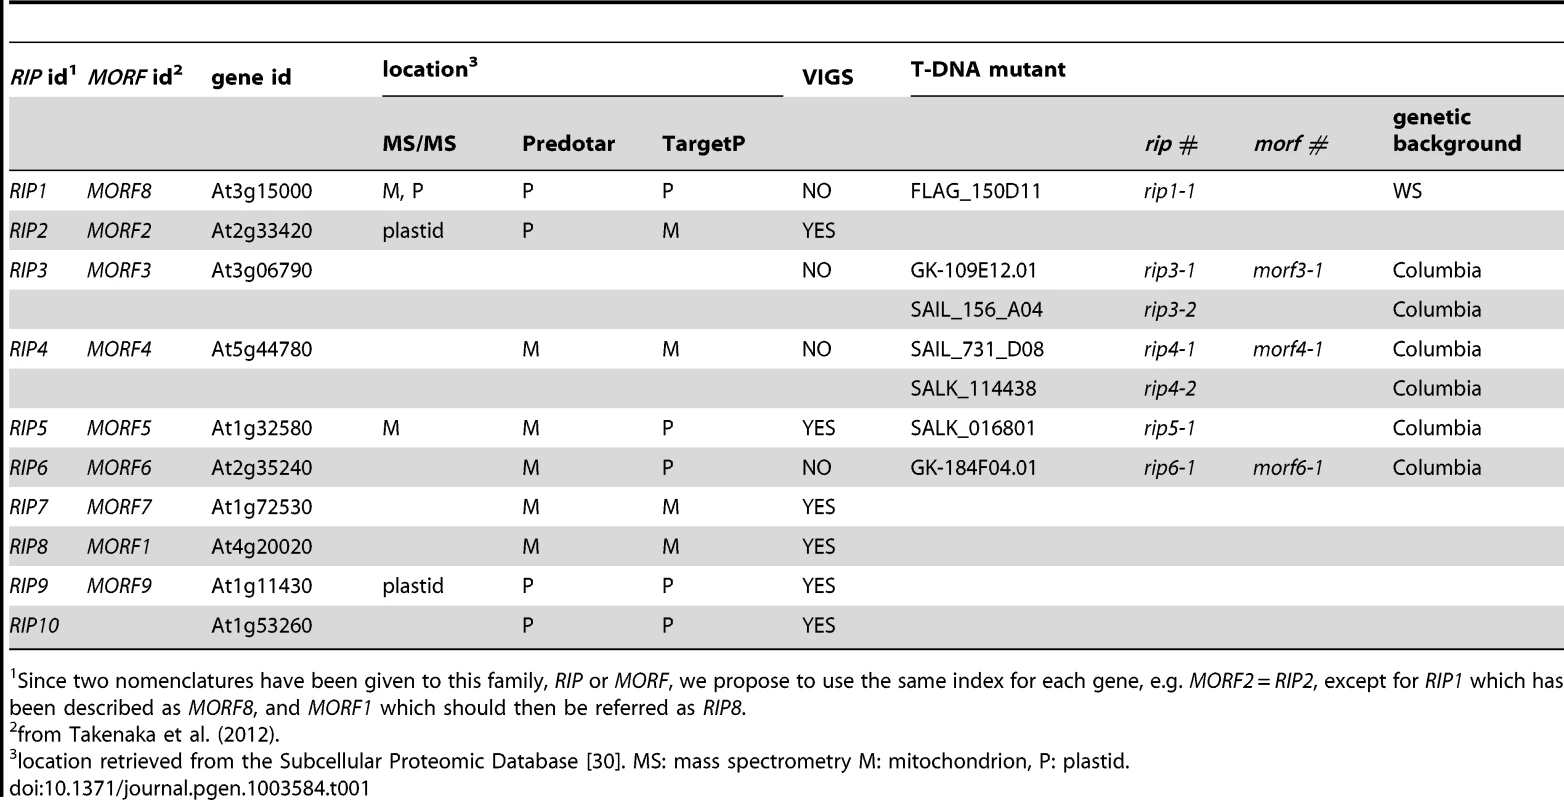 Description of the genes, protein product locations, and mutants used in this study.